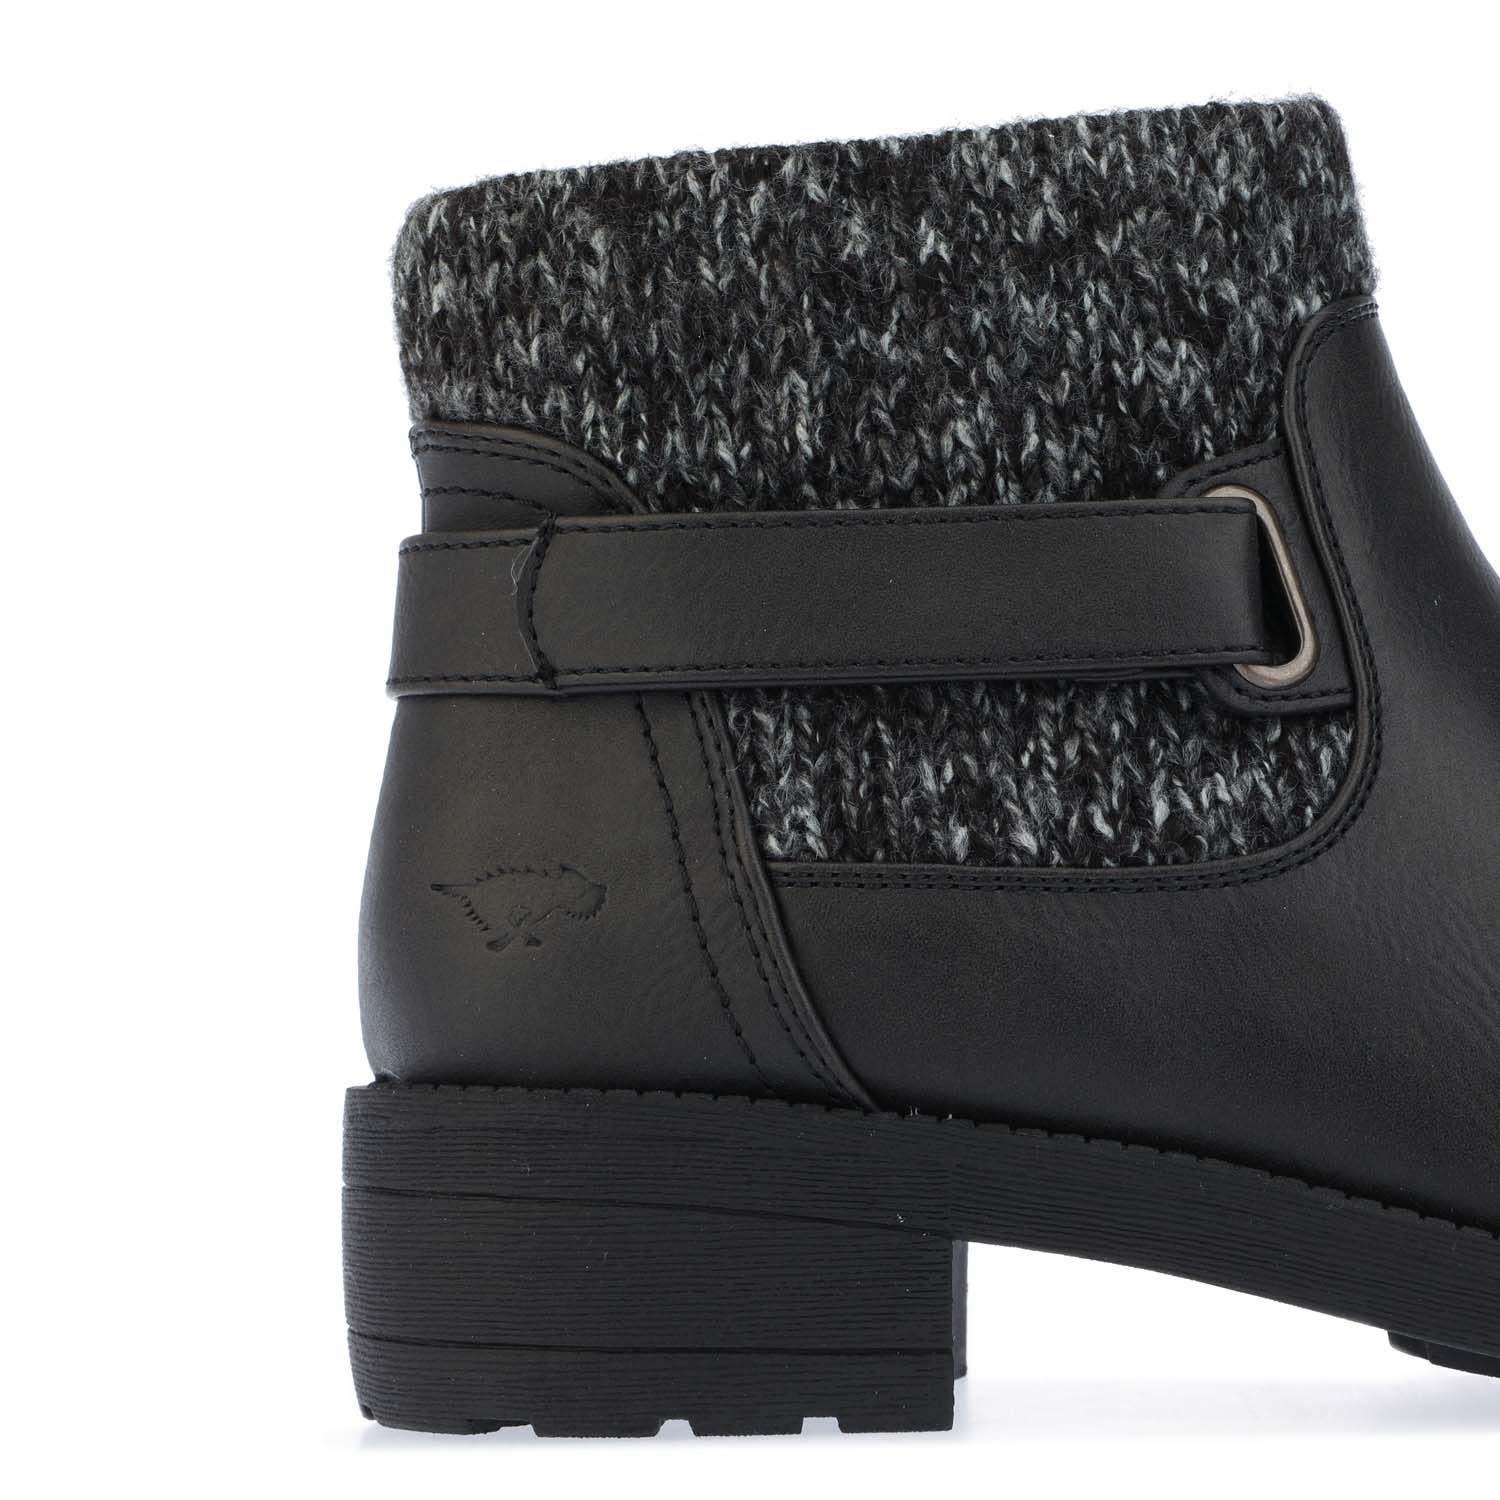 Womens Rocket Dog Tegal Santee Boots in black.- Synthetic and textile upper.- Inside zip closure.- Knitted collar. - Debossed branding.- Reinforced heel and toe.- Textile lining.- Rubber sole.- Ref.: TEGALSANTEE